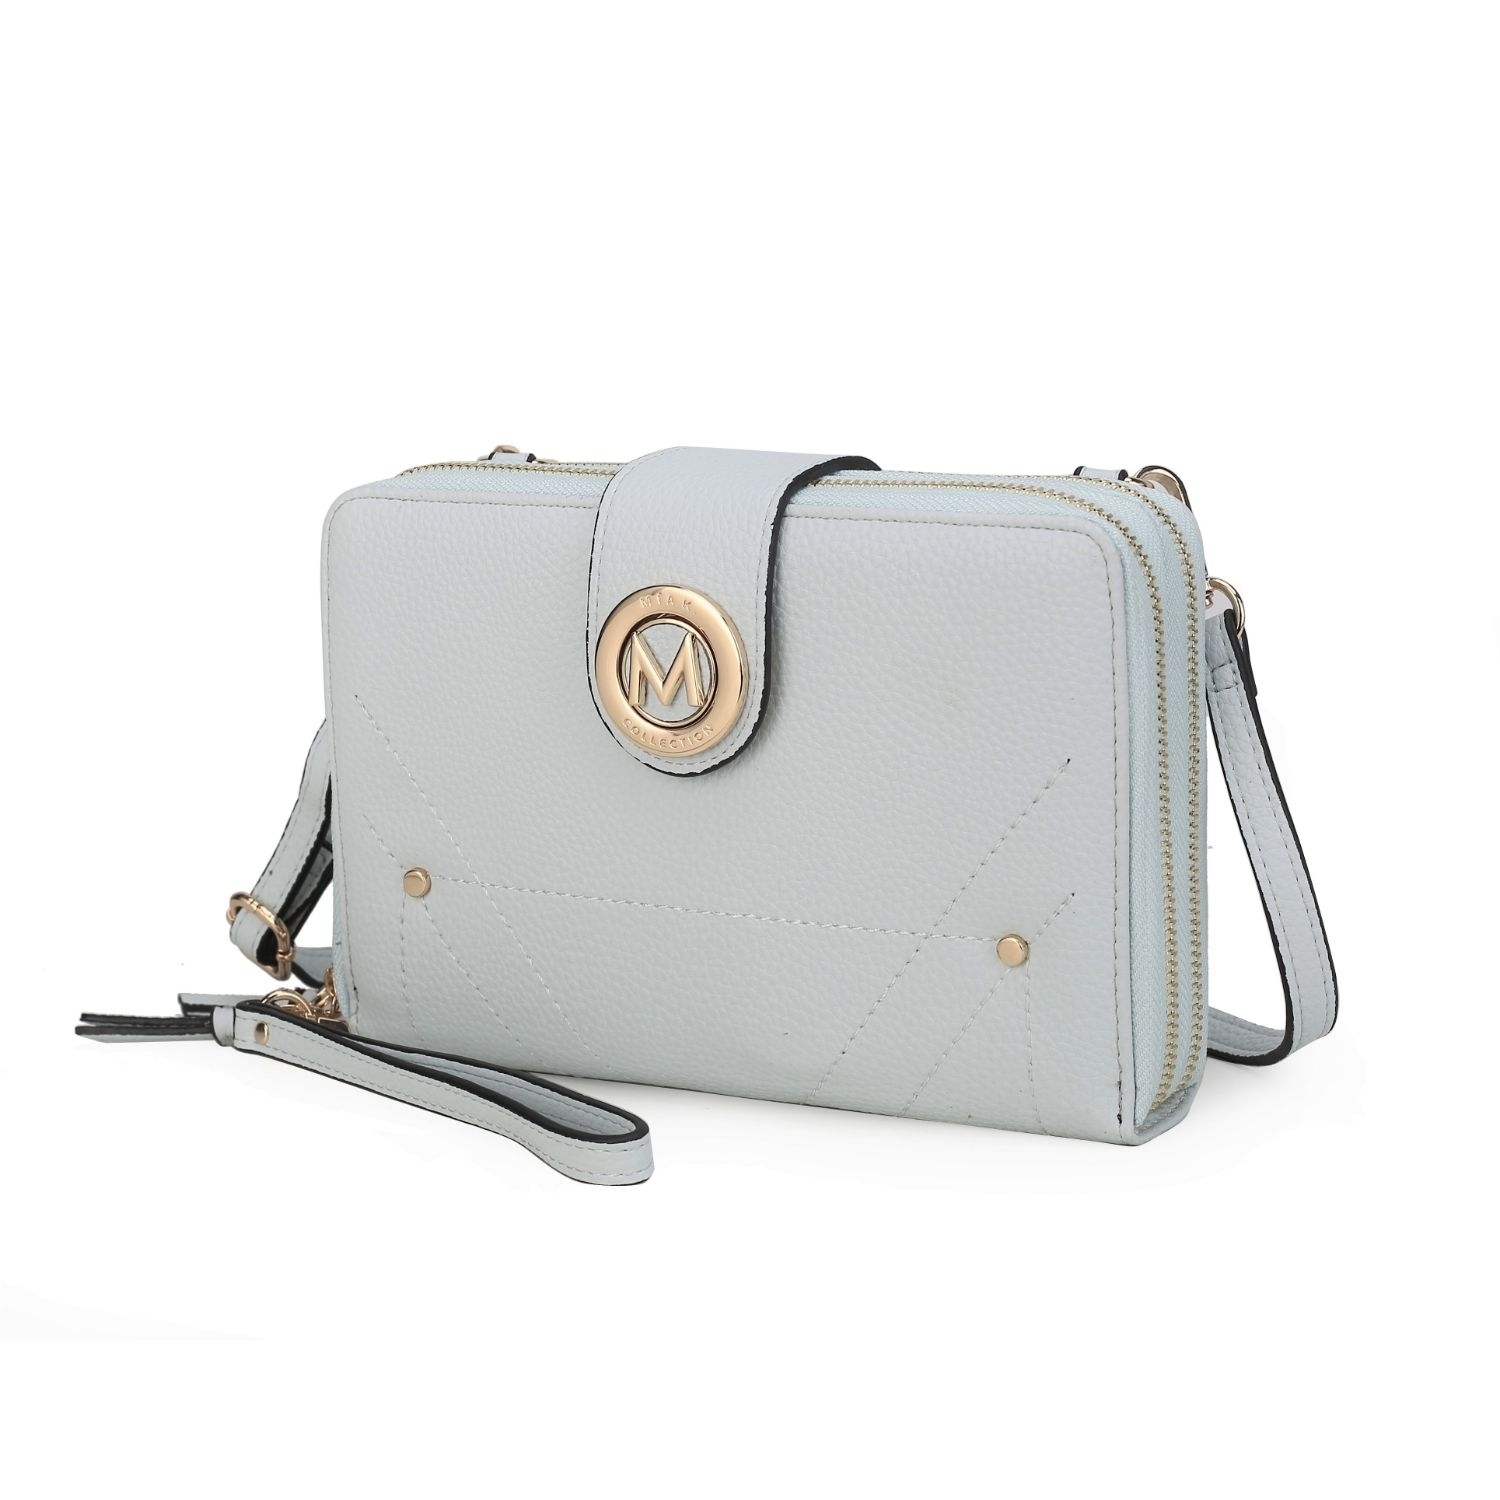 MKF Collection Sage Cell-phone - Wallet Crossbody Handbag With Optional Wristlet By Mia K - Light Blue